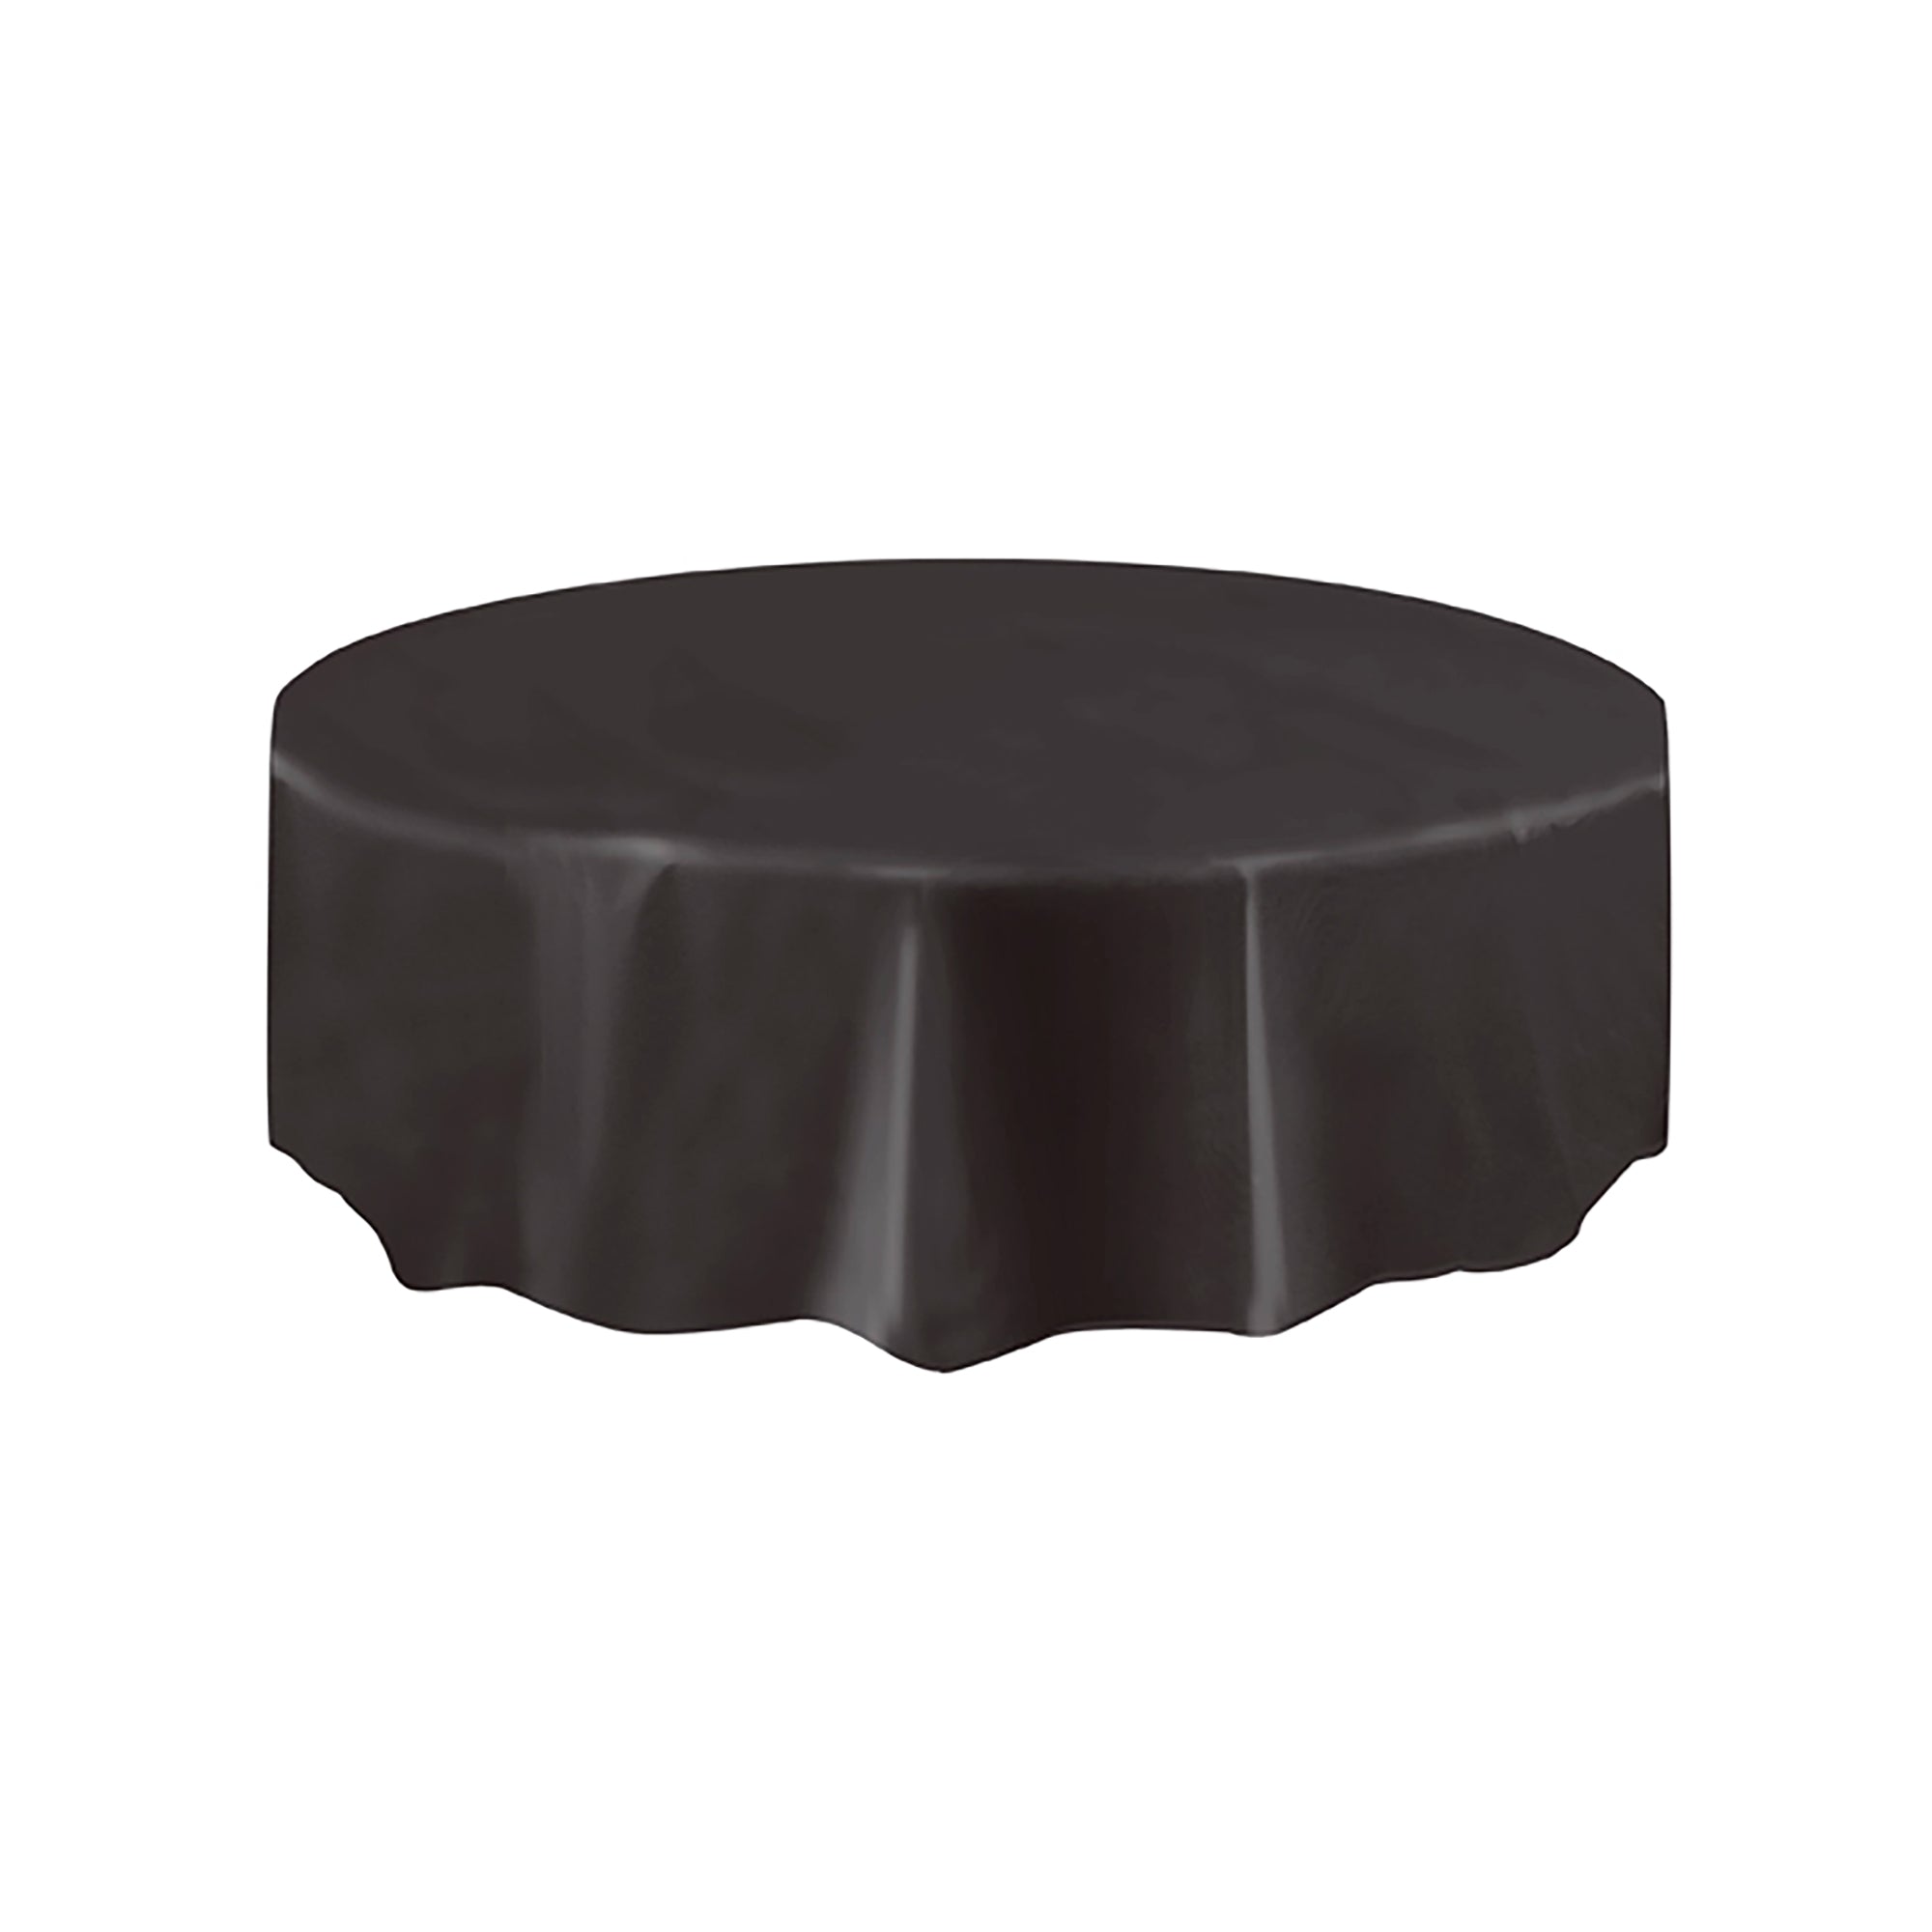 Black Round Plastic Table Cover, 84 Inches, 1 Count